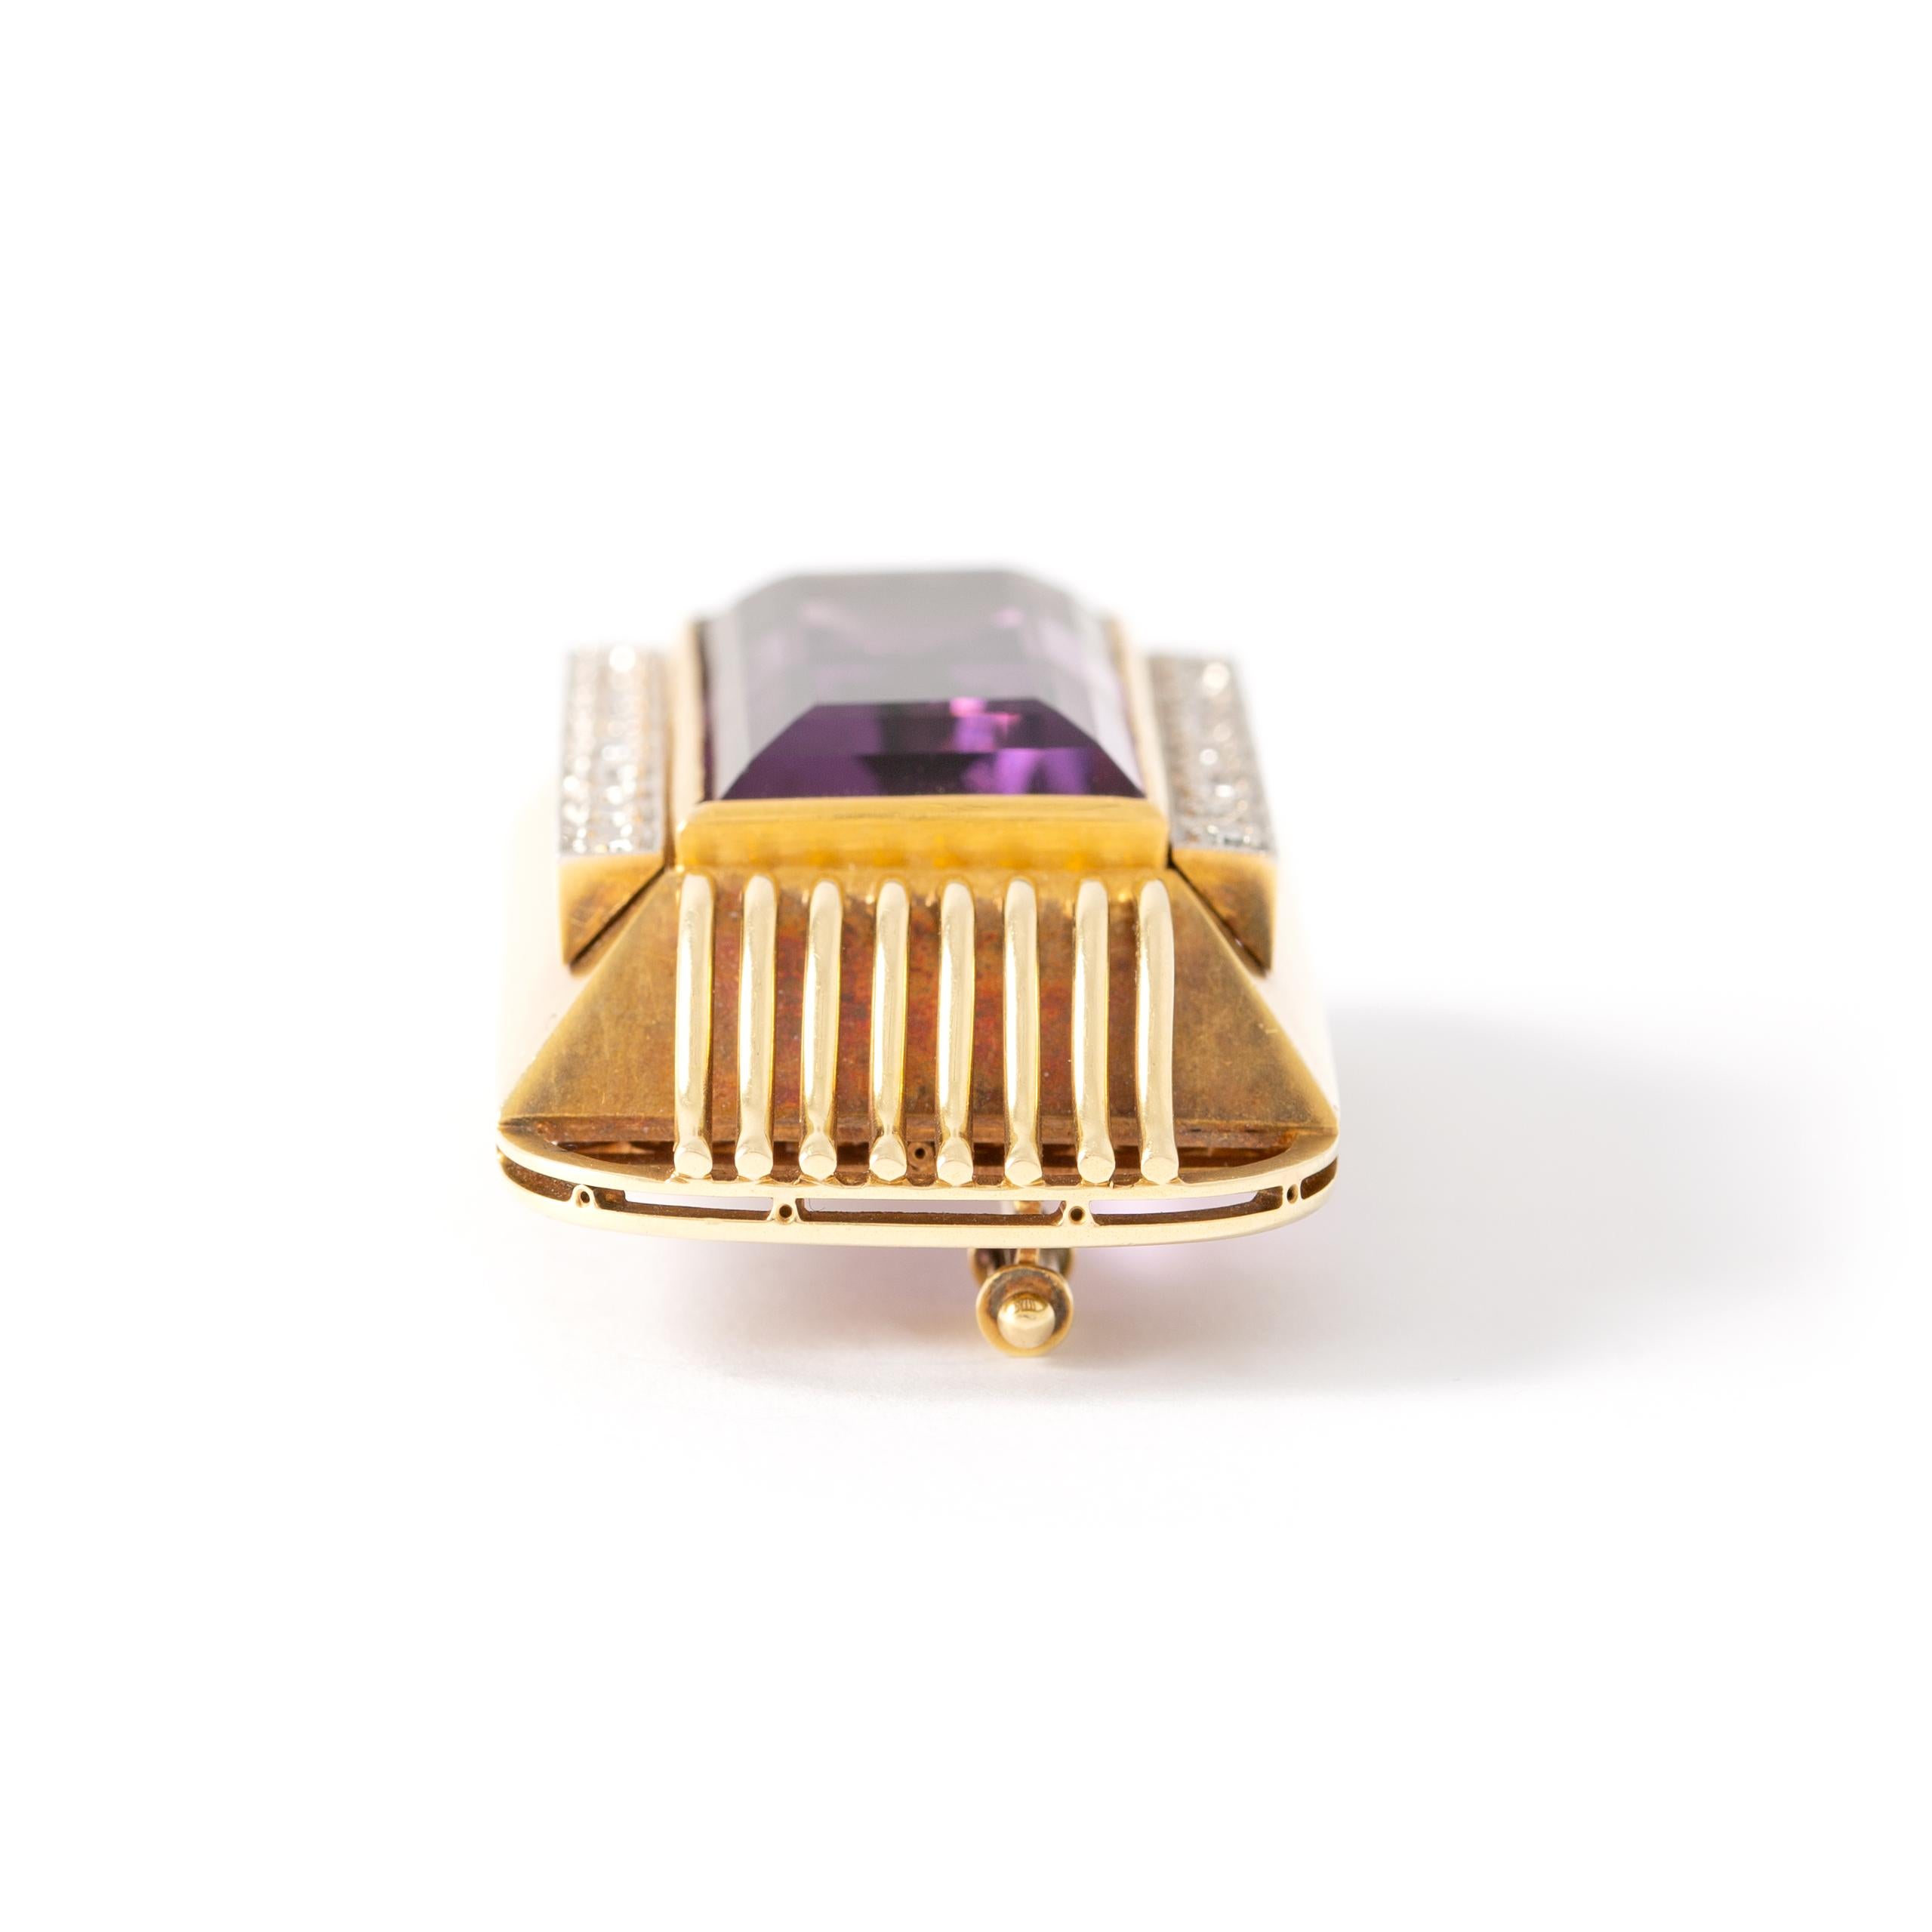 Retro Brooch in yellow gold 14K and white 18K centered on a rectangular amethyst (chip) framed with 8/8 diamonds. 
Circa 1950. 
Dimensions of the amethyst: 2.40 x 1.20 cm. 
Dimensions of the spindle: 4.50 x 2.20 cm. 
Gross weight: 23.72 grams. 